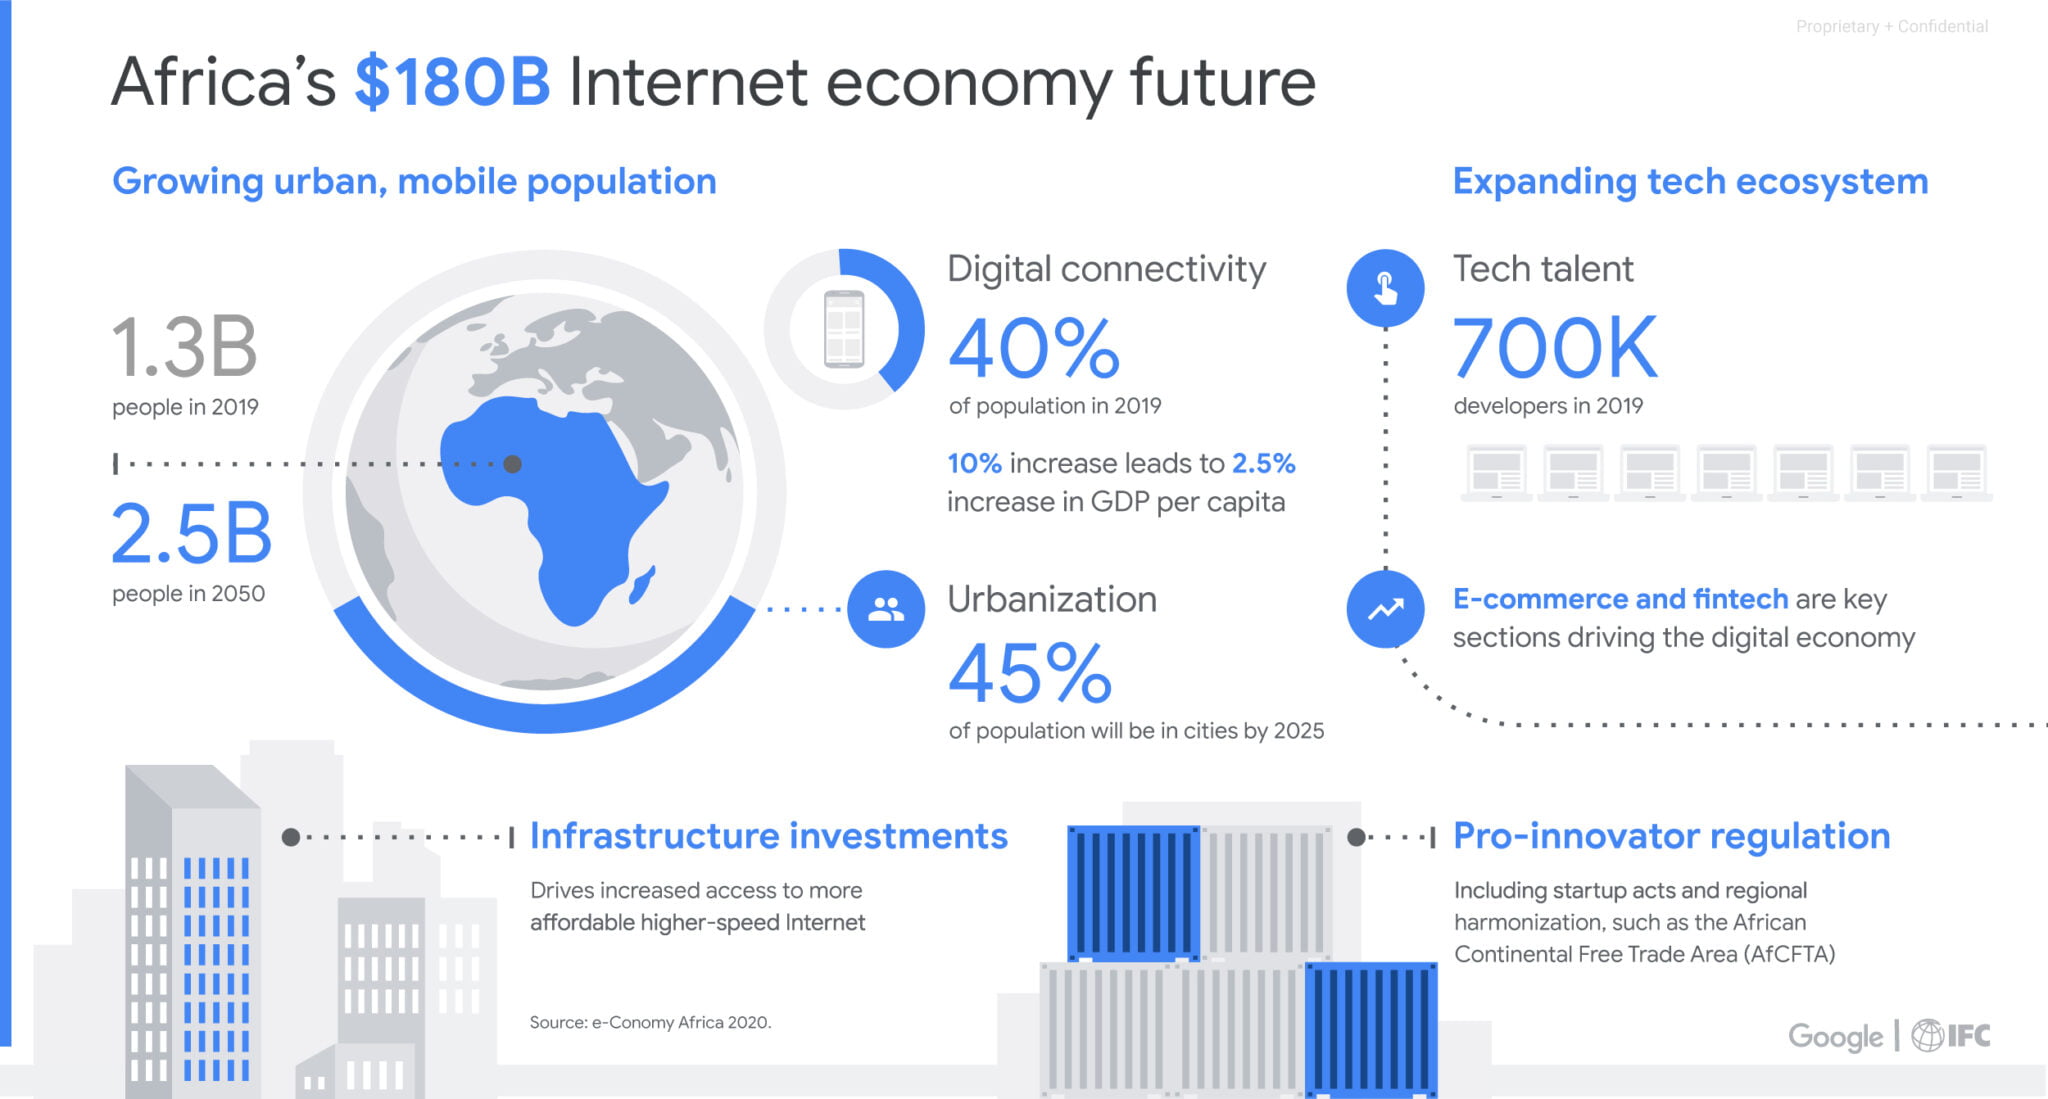 infographic for the e-conomy Africa 2020 report by Google and IFC